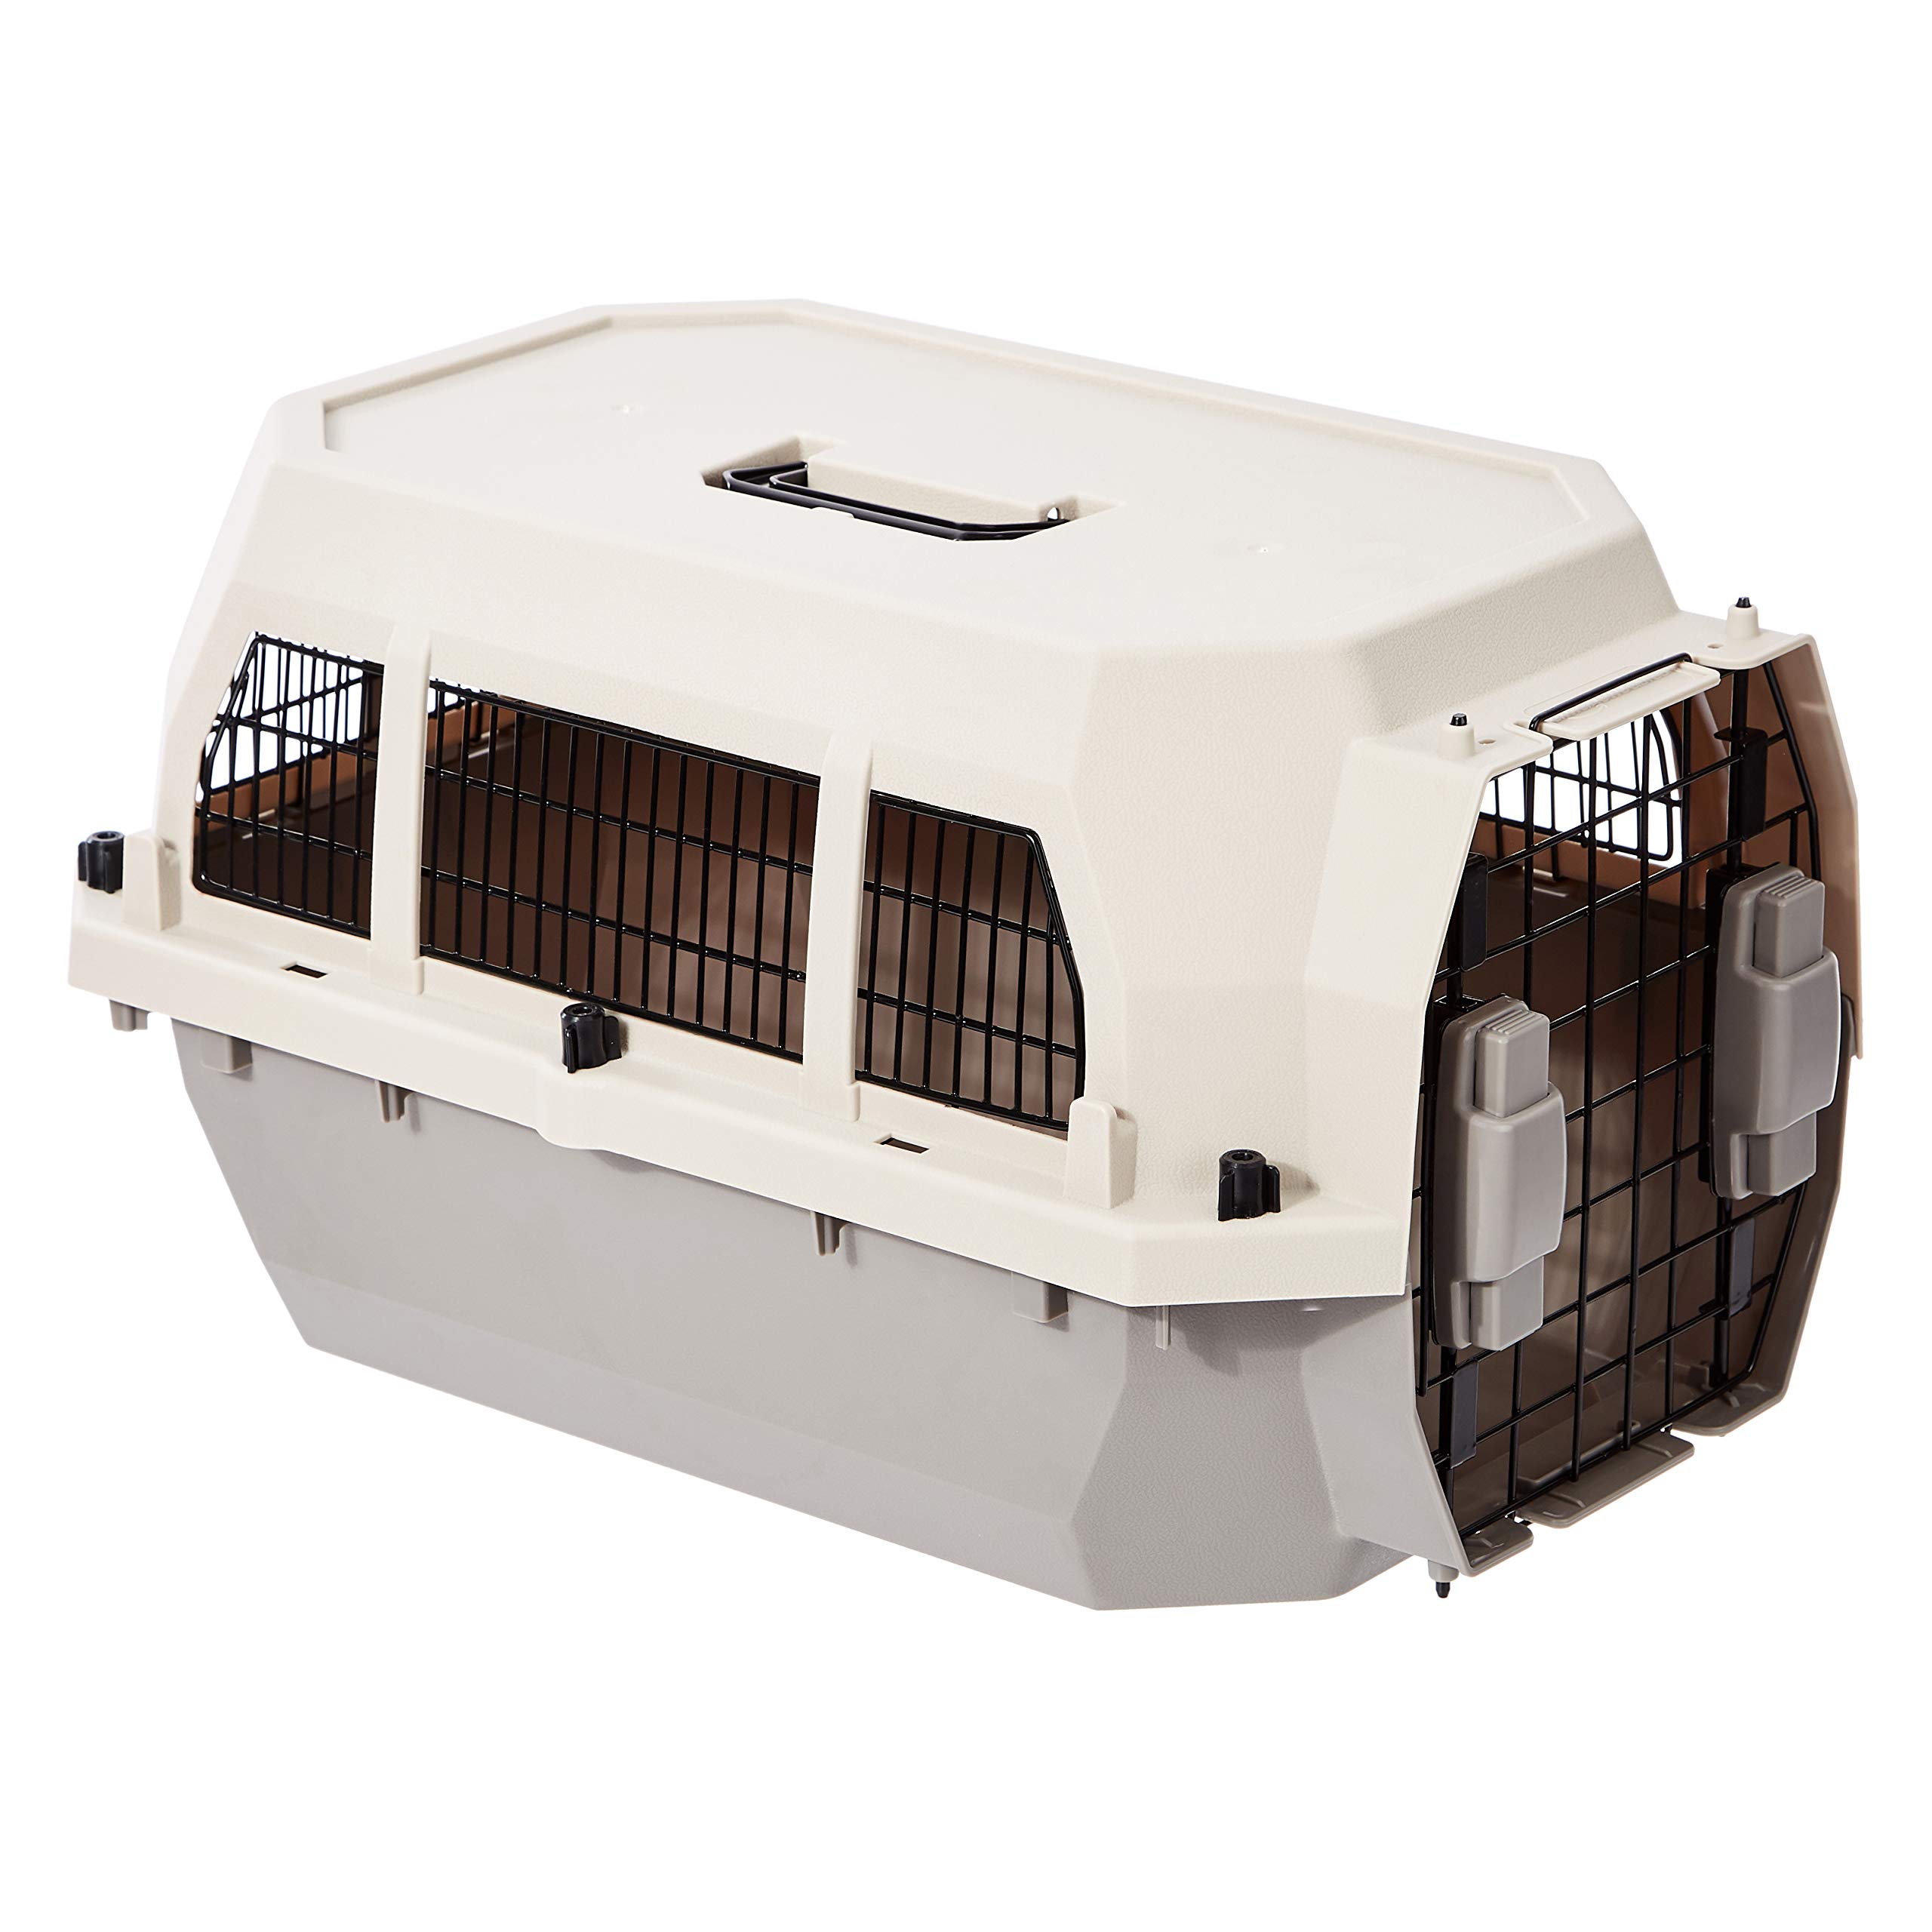 Basics Pet Carrier Kennel With Metal Wire Ventilation, 23-Inch - $43.90